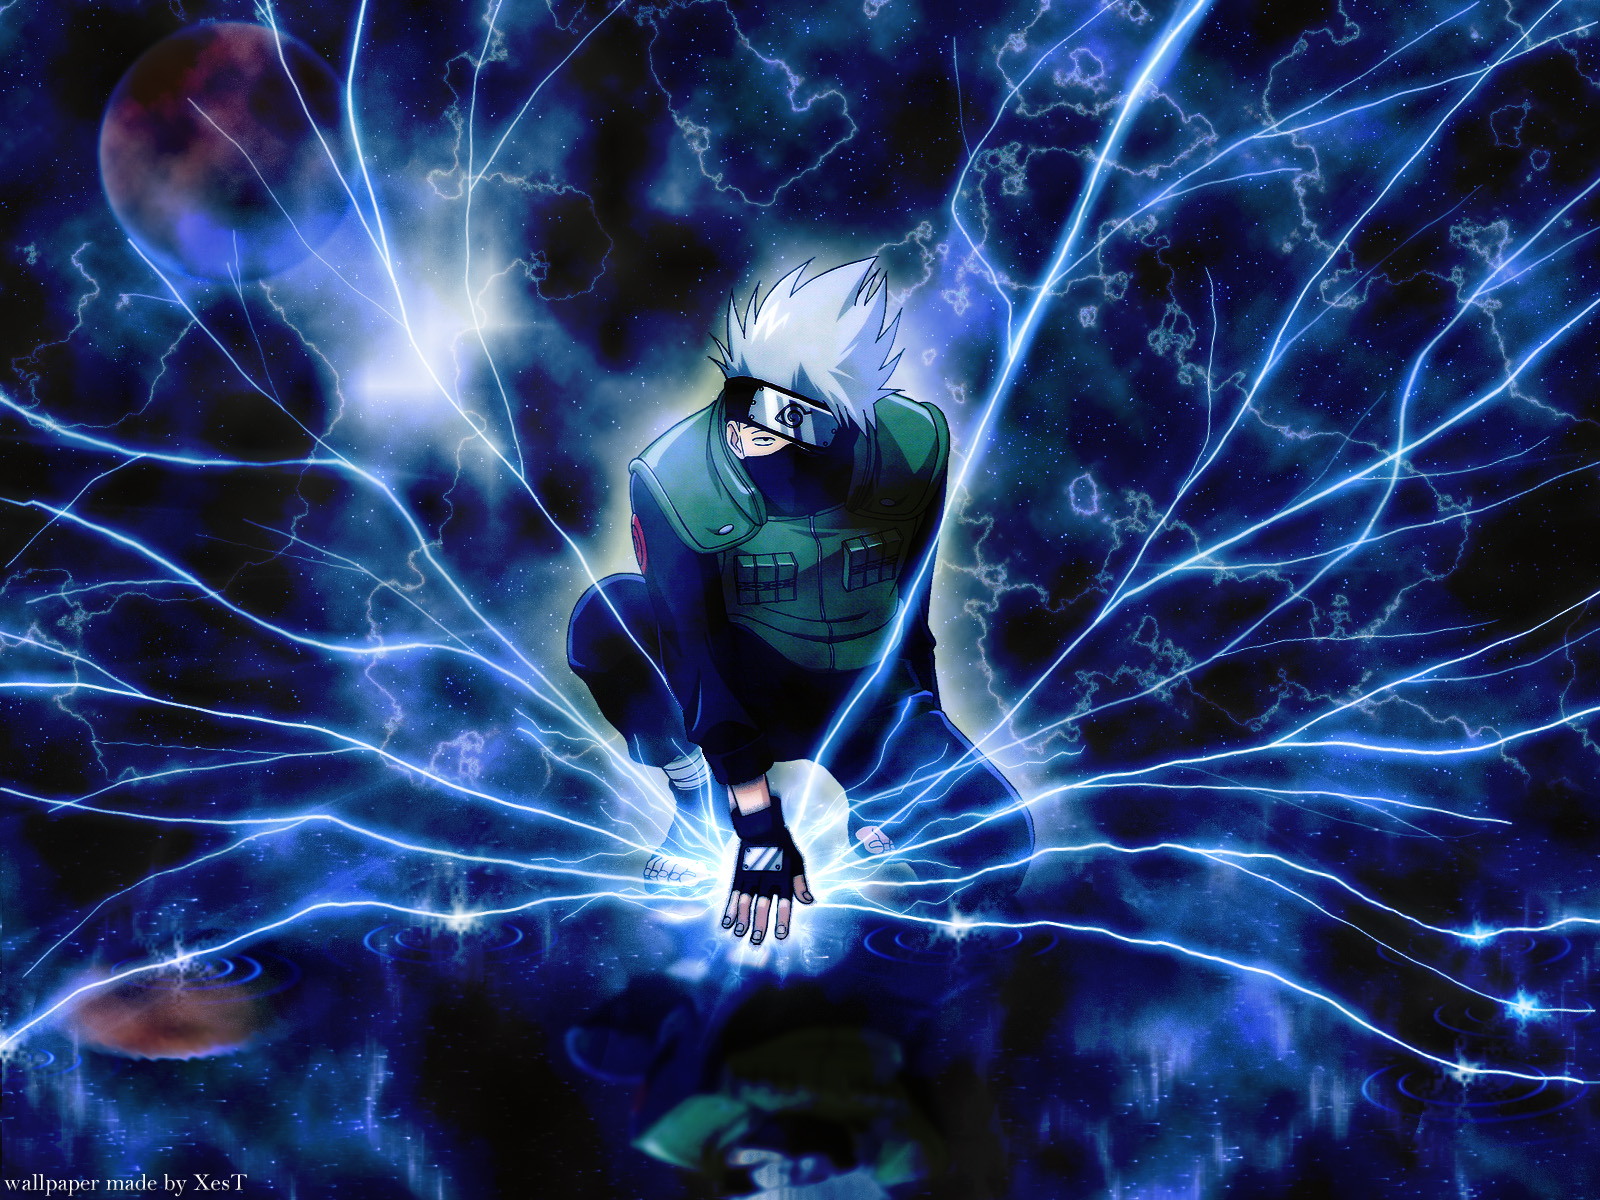 Full HD Wallpaper Pack With A Lot Of Intresting And Cool Naruto